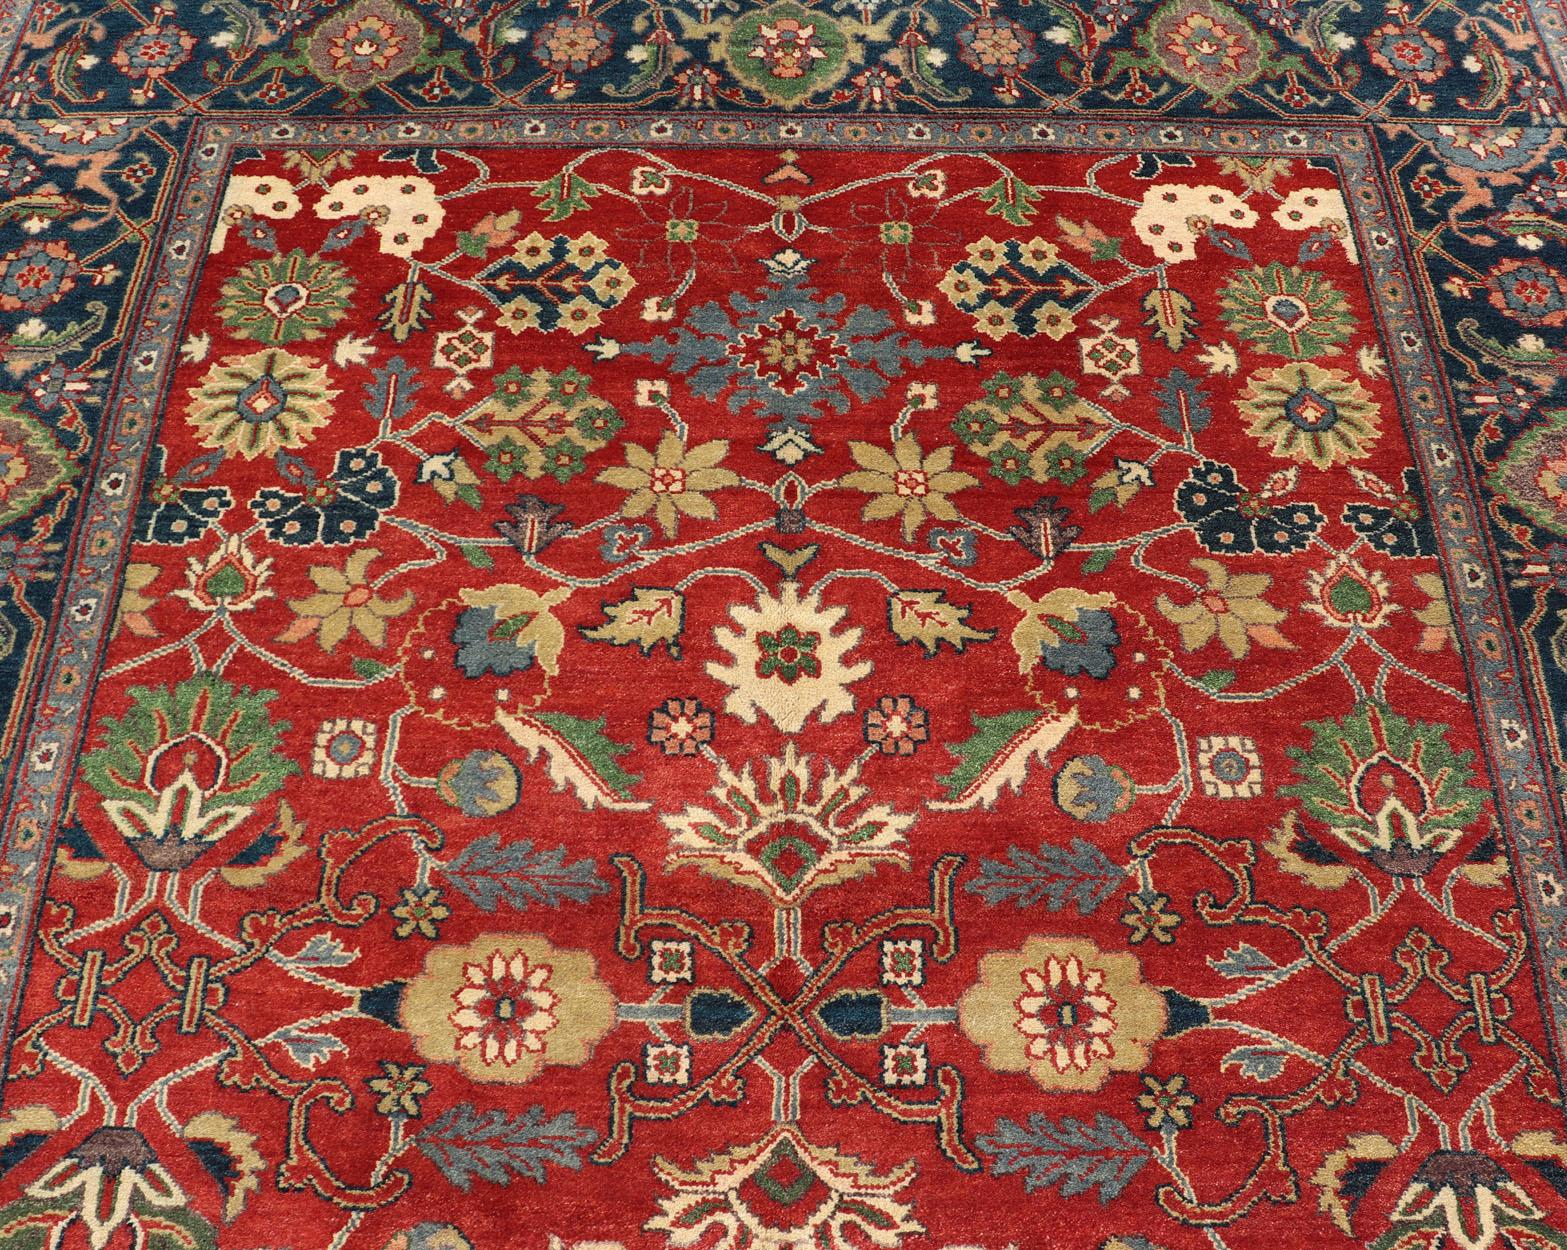 Reproduction Sultanabad-Mahal All-over Floral Hand-Knotted Carpet  6